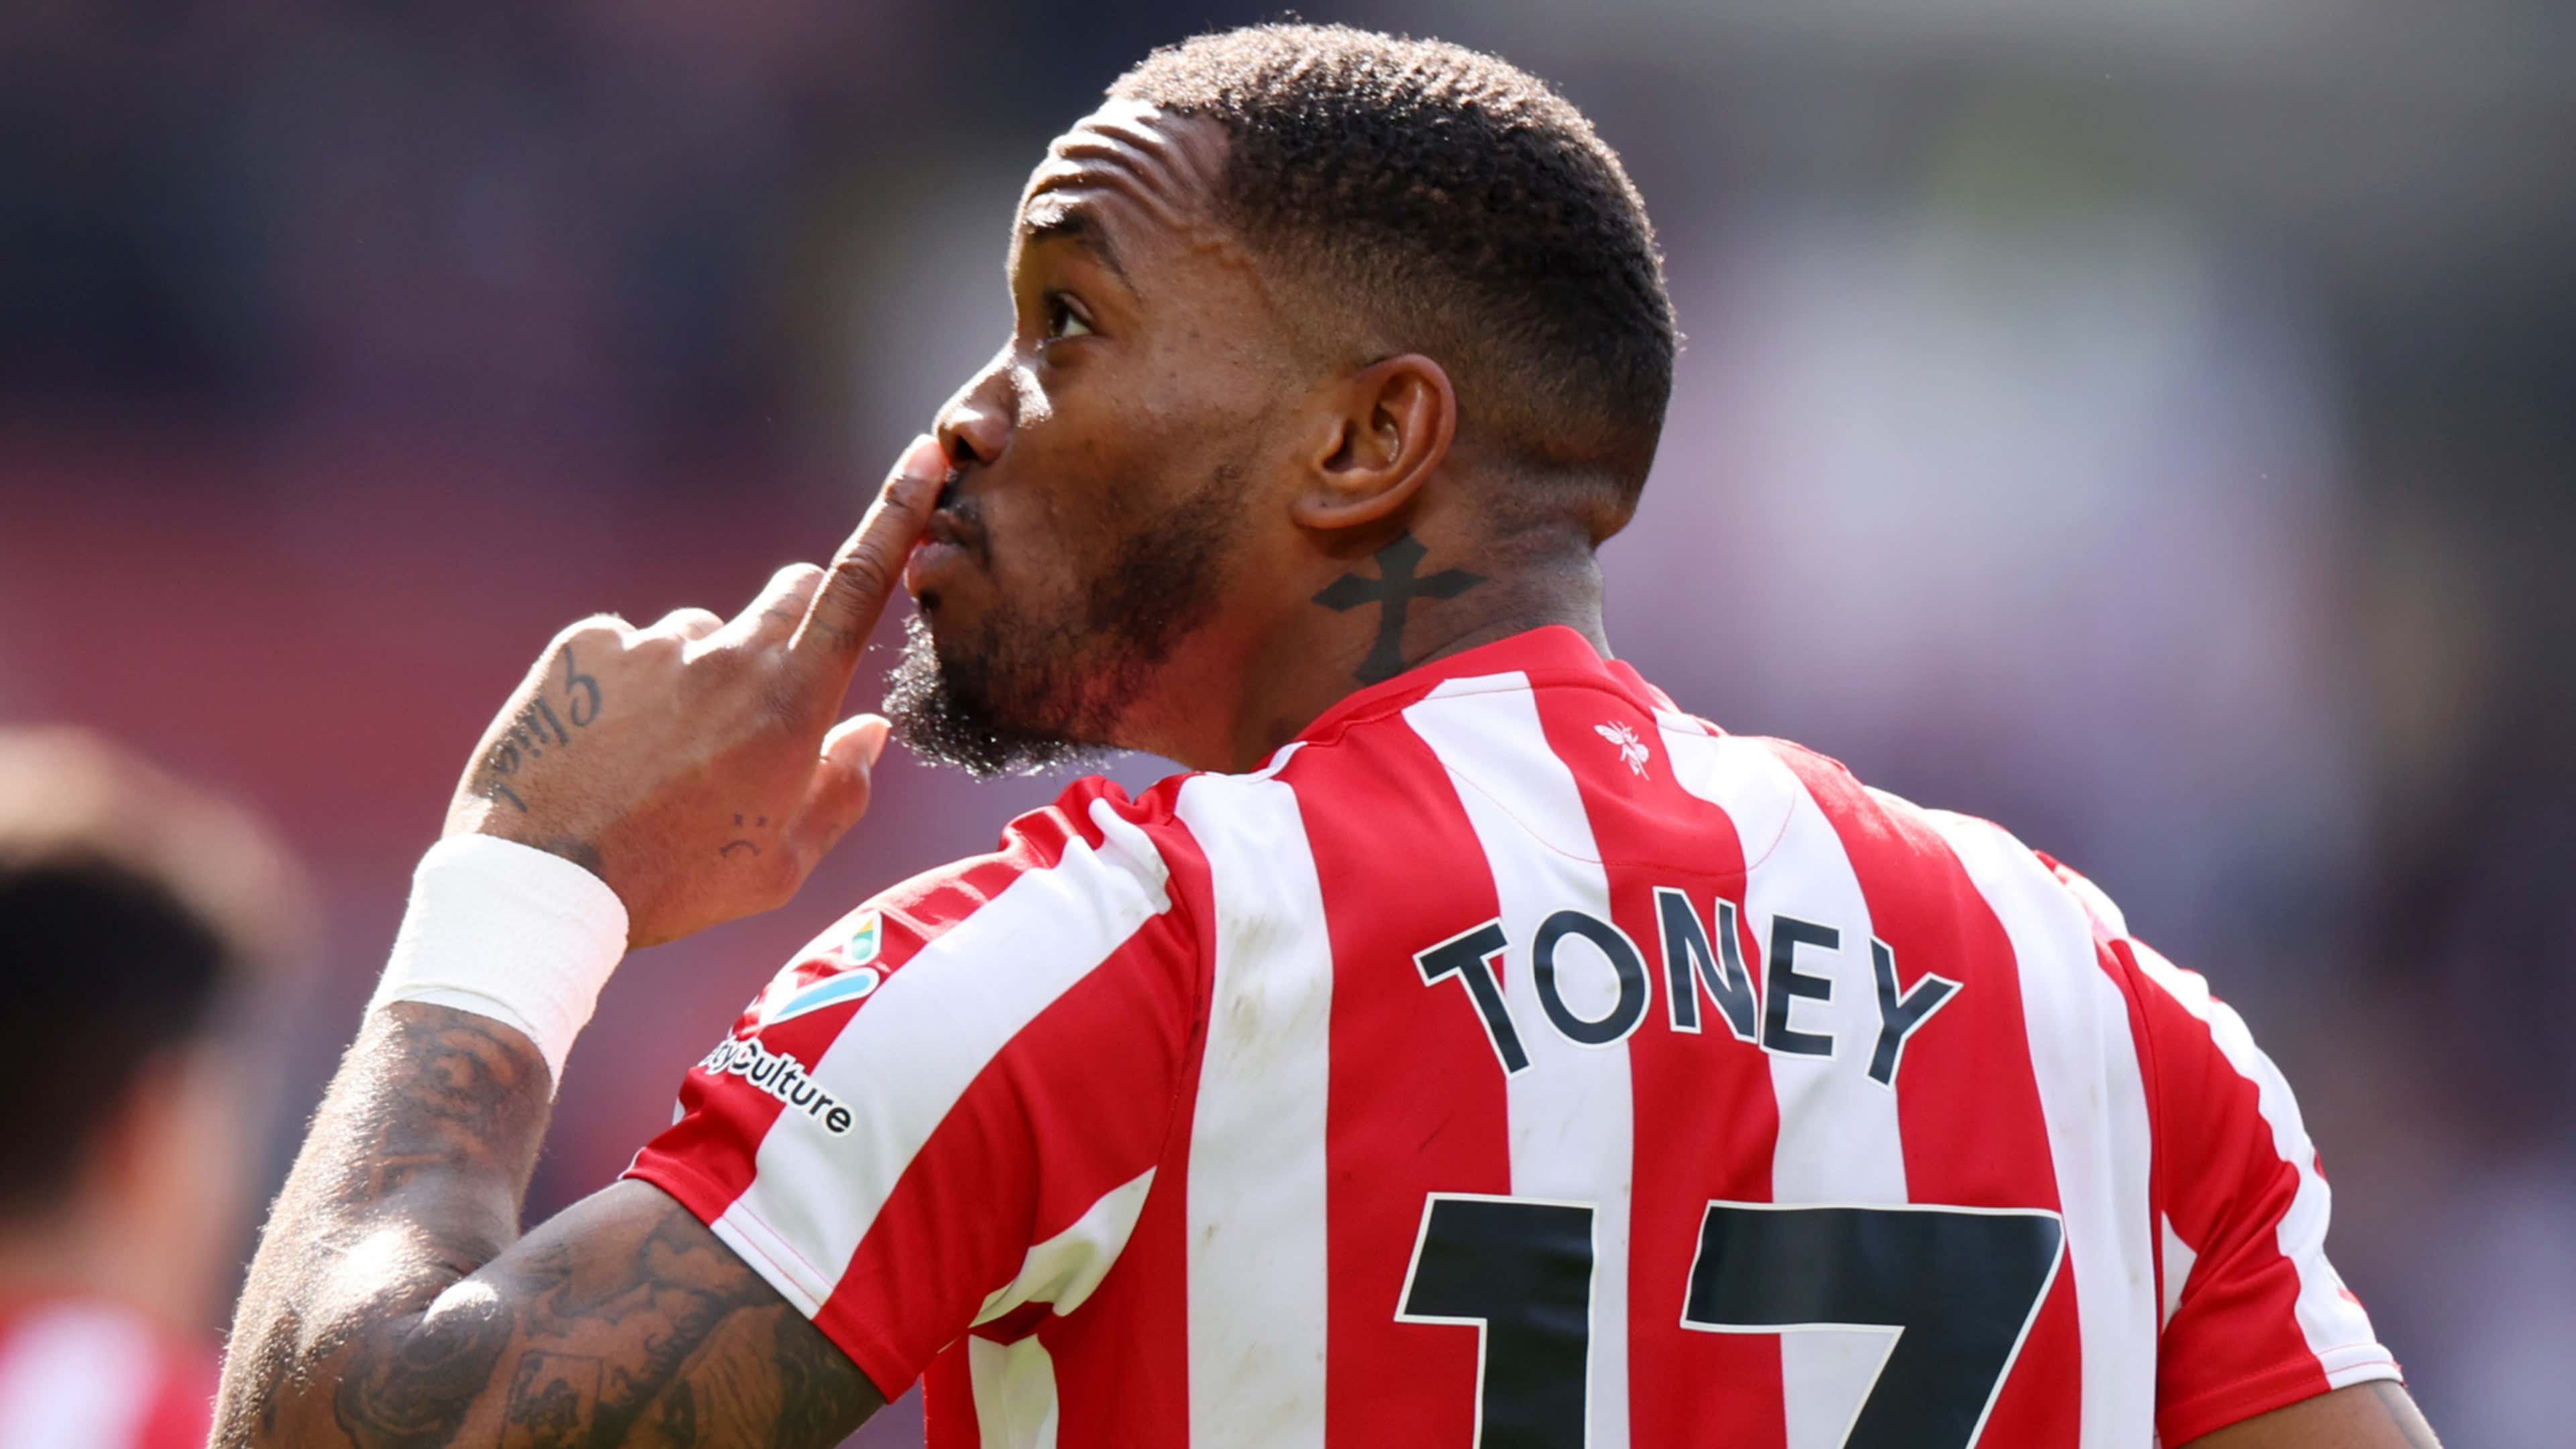 Tottenham continue to keep an eye on Toney amid Arsenal and Chelsea interest. 